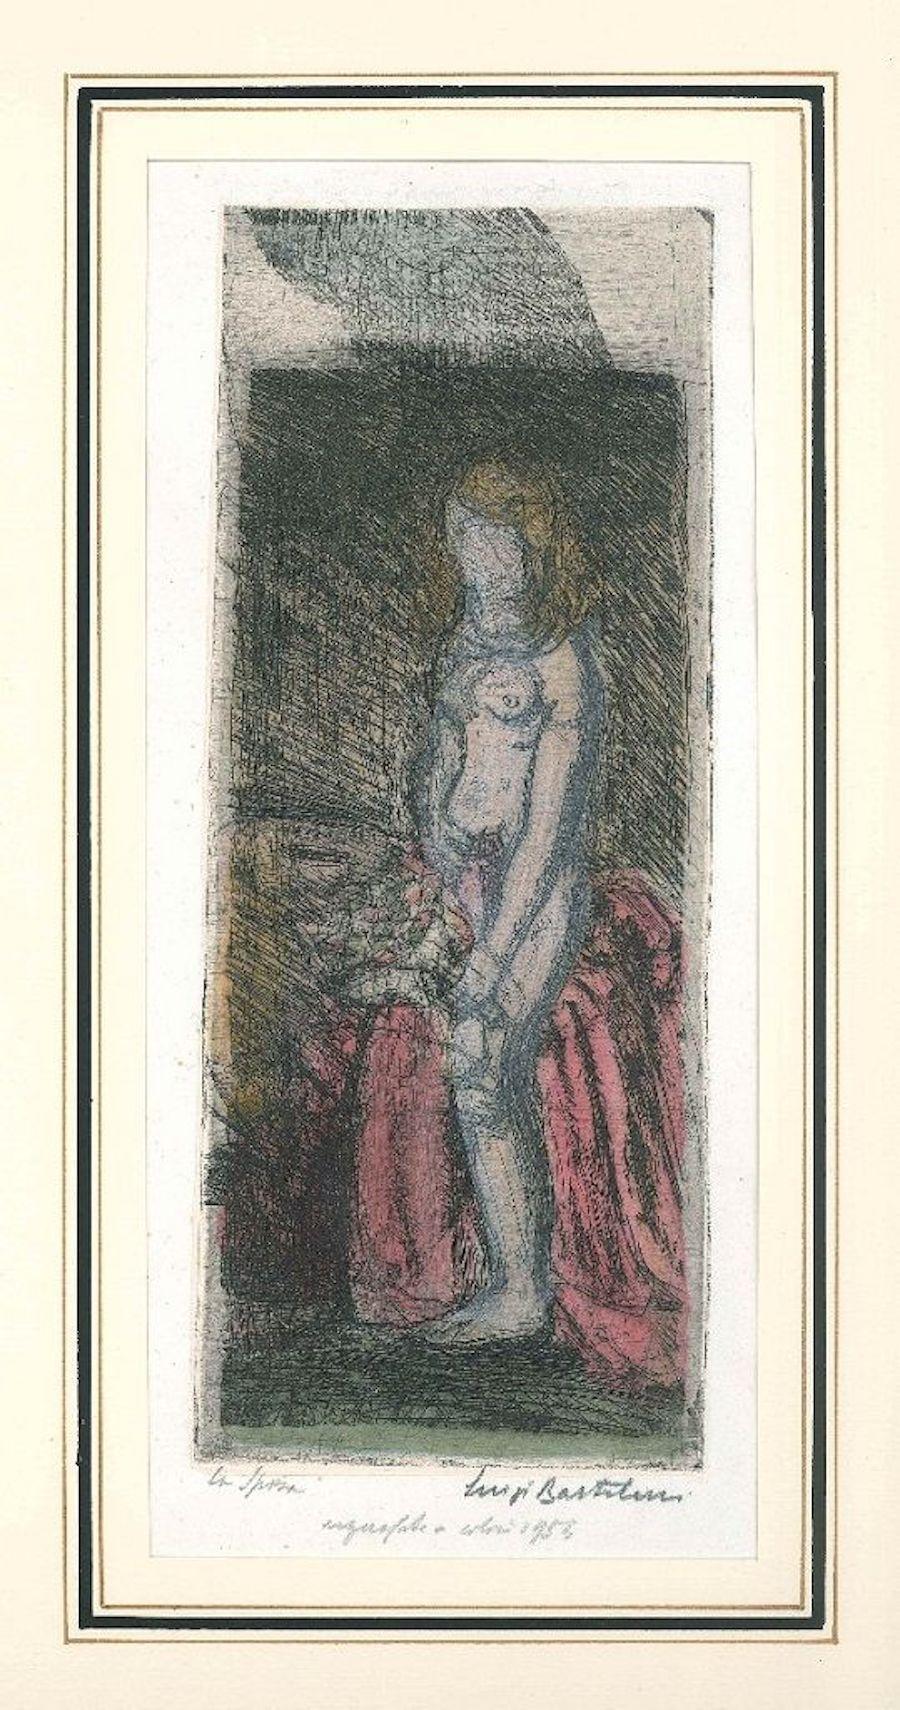 Image dimensions:  27.2 x 11  cm.

La sposa (The Bride) is an original artwork realized by Luigi Bartolini in 1953.

Original watercolored etching applied on China ink paper.

Hand-signed on the lower right corner 